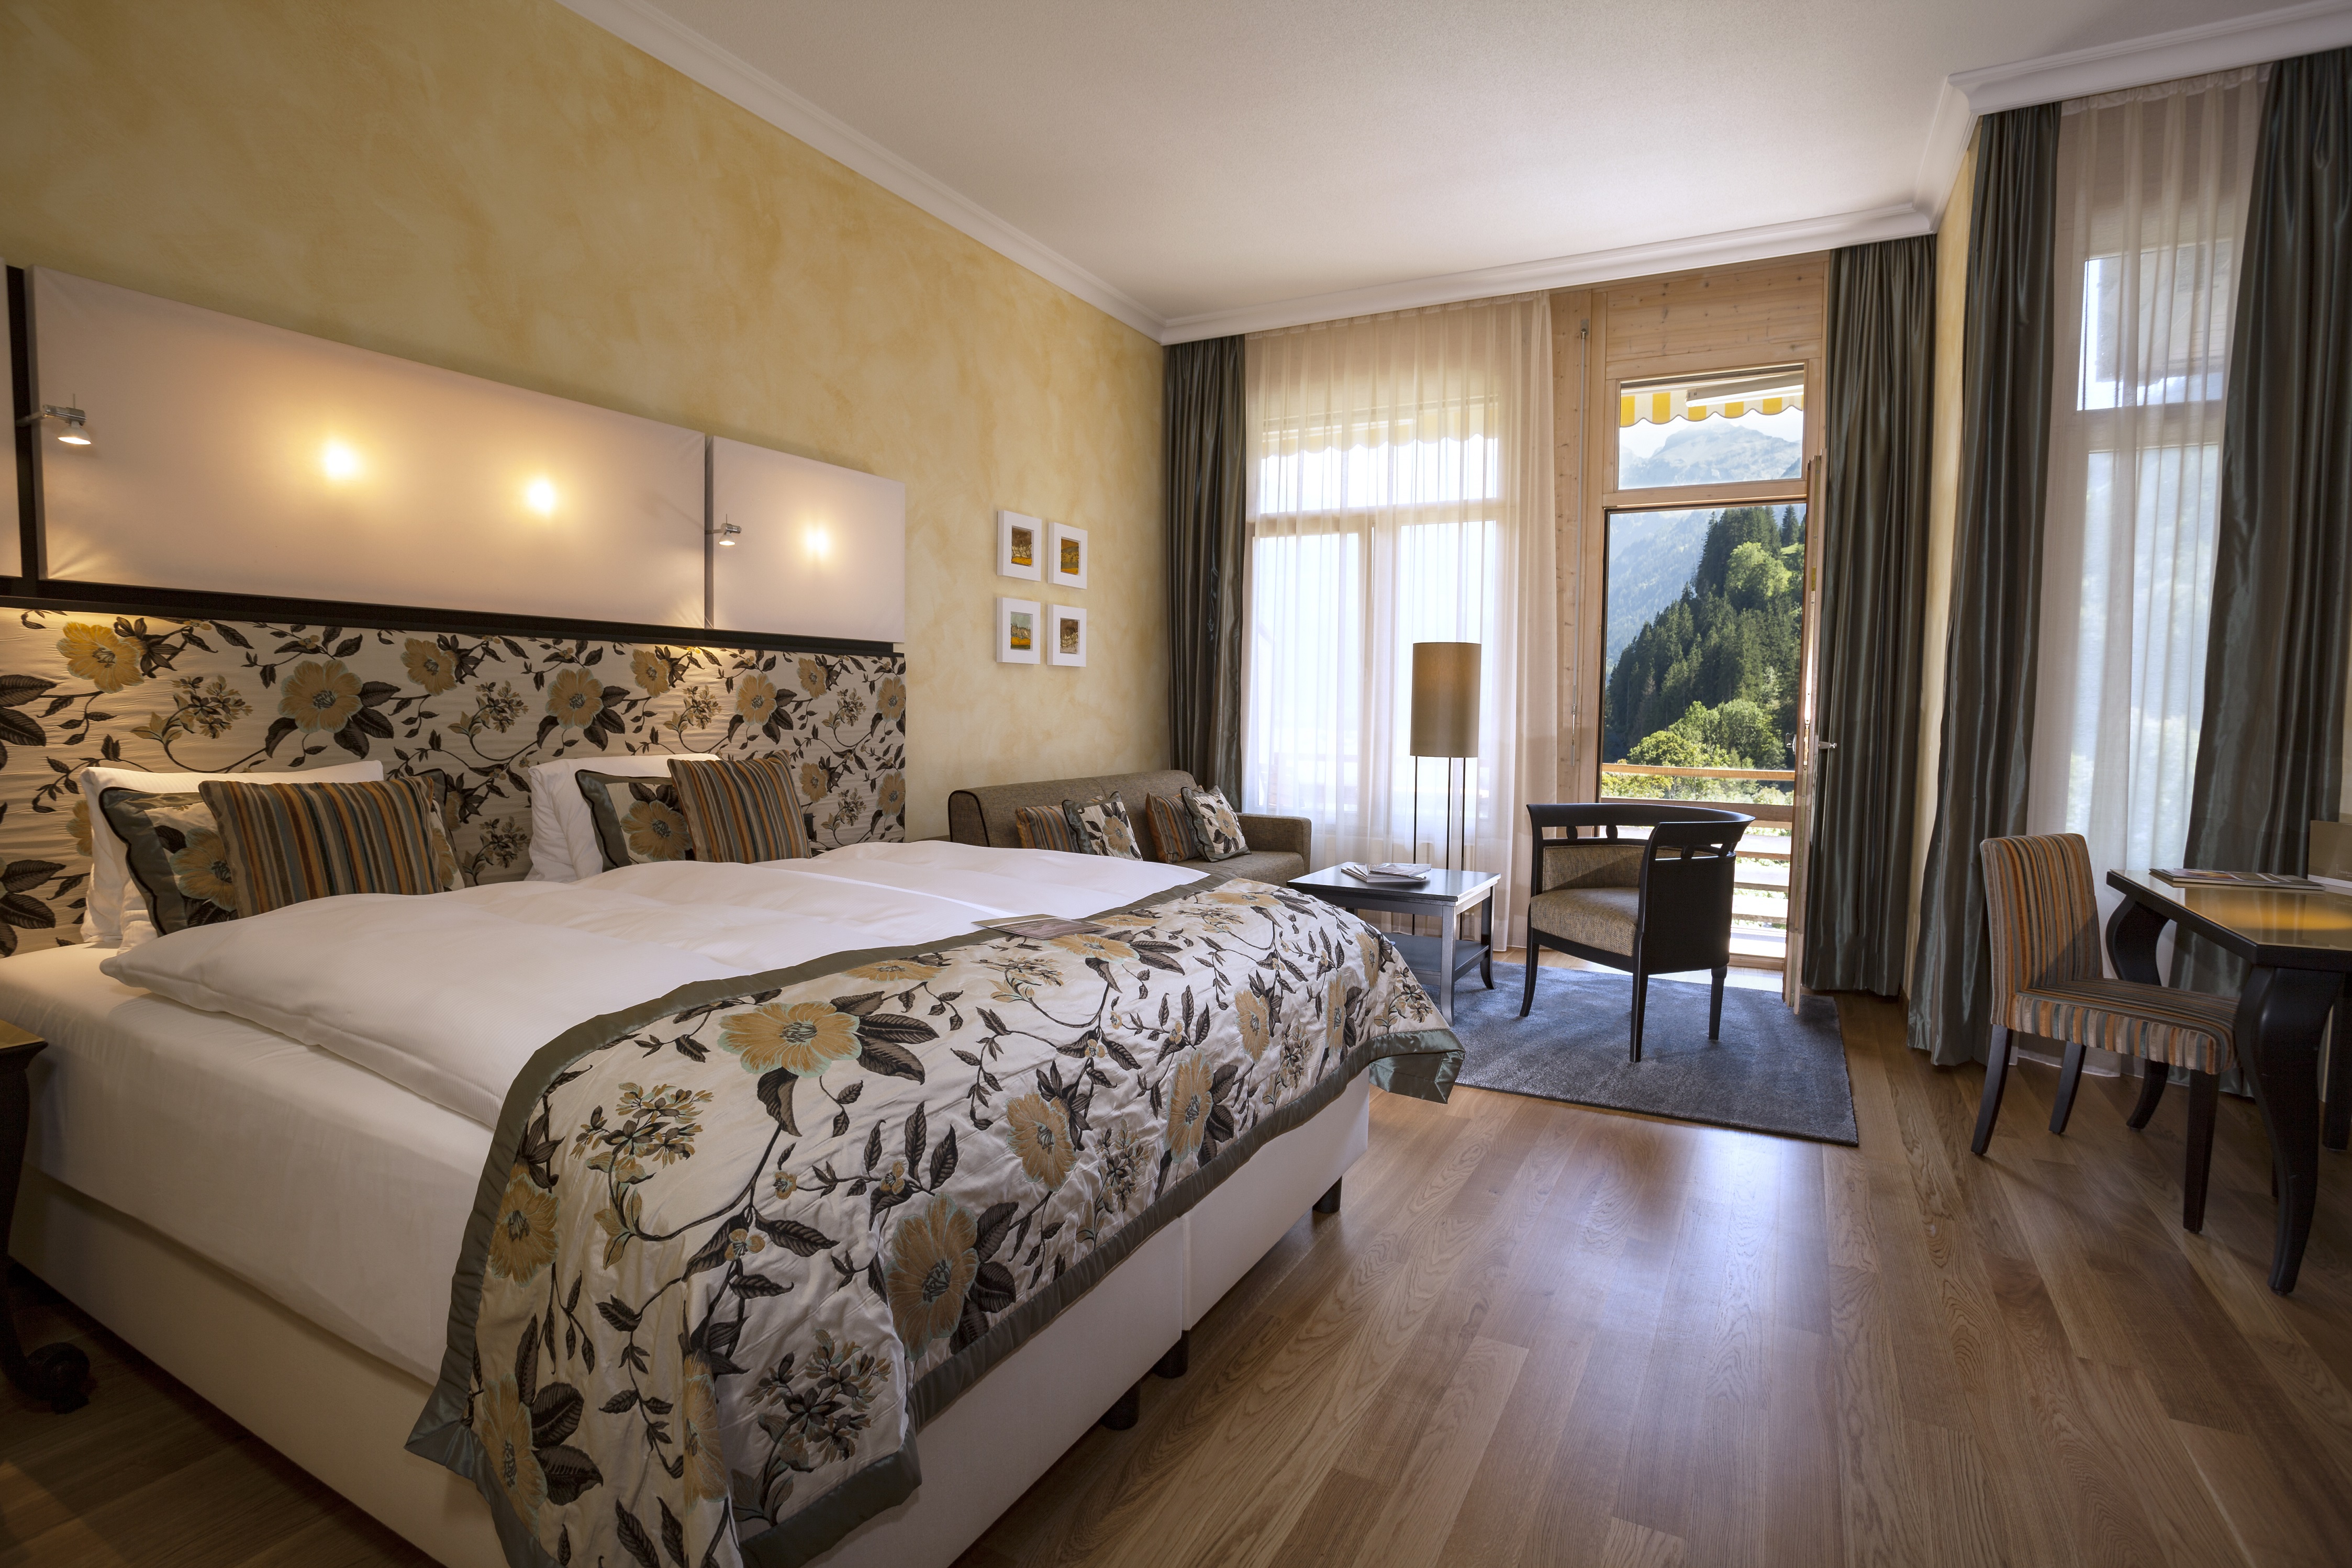 Rooms of your dreams at the Lenkerhof